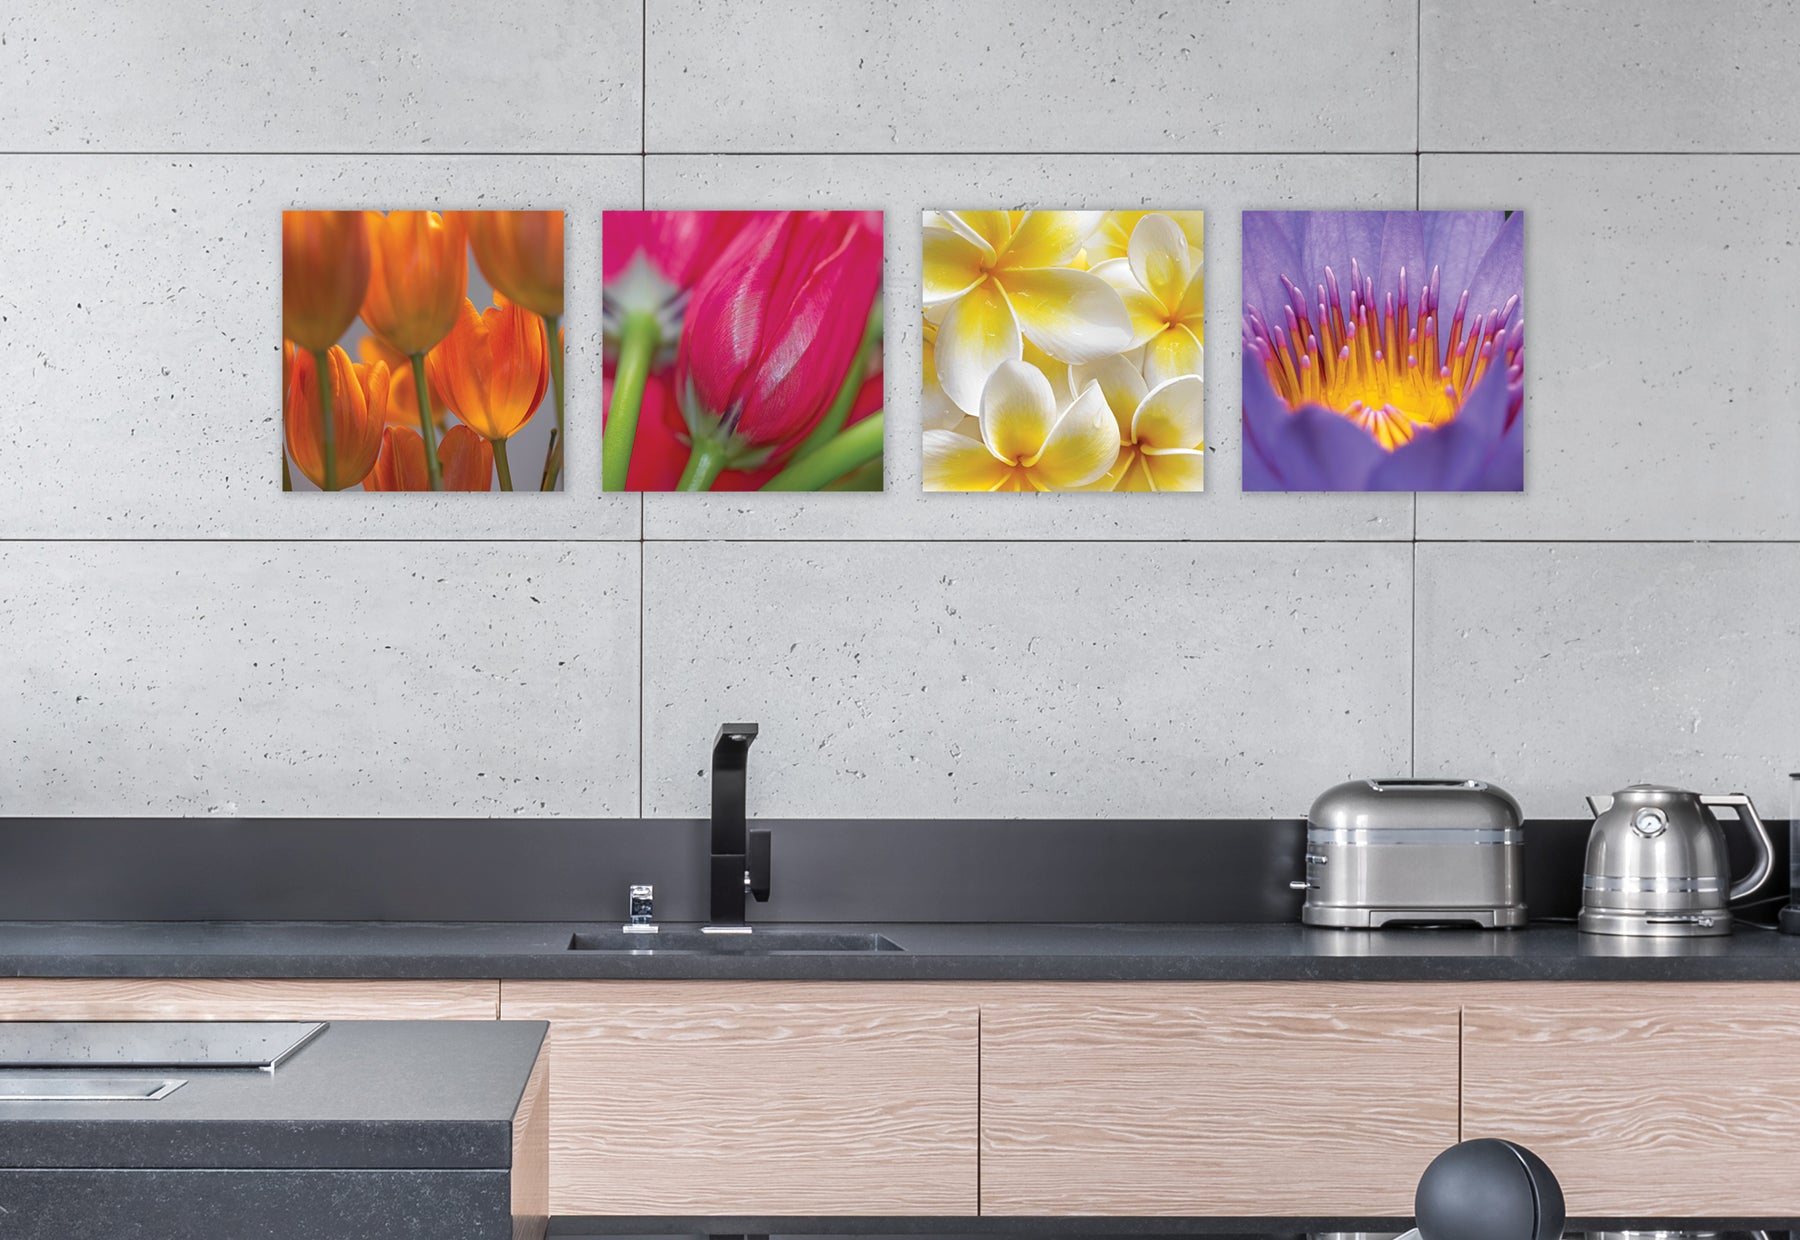 Sleek modern kitchen with light brown cabinets, dark gray countertops and concrete walls featuring four square photographs of colorful flowers by Peter Lik